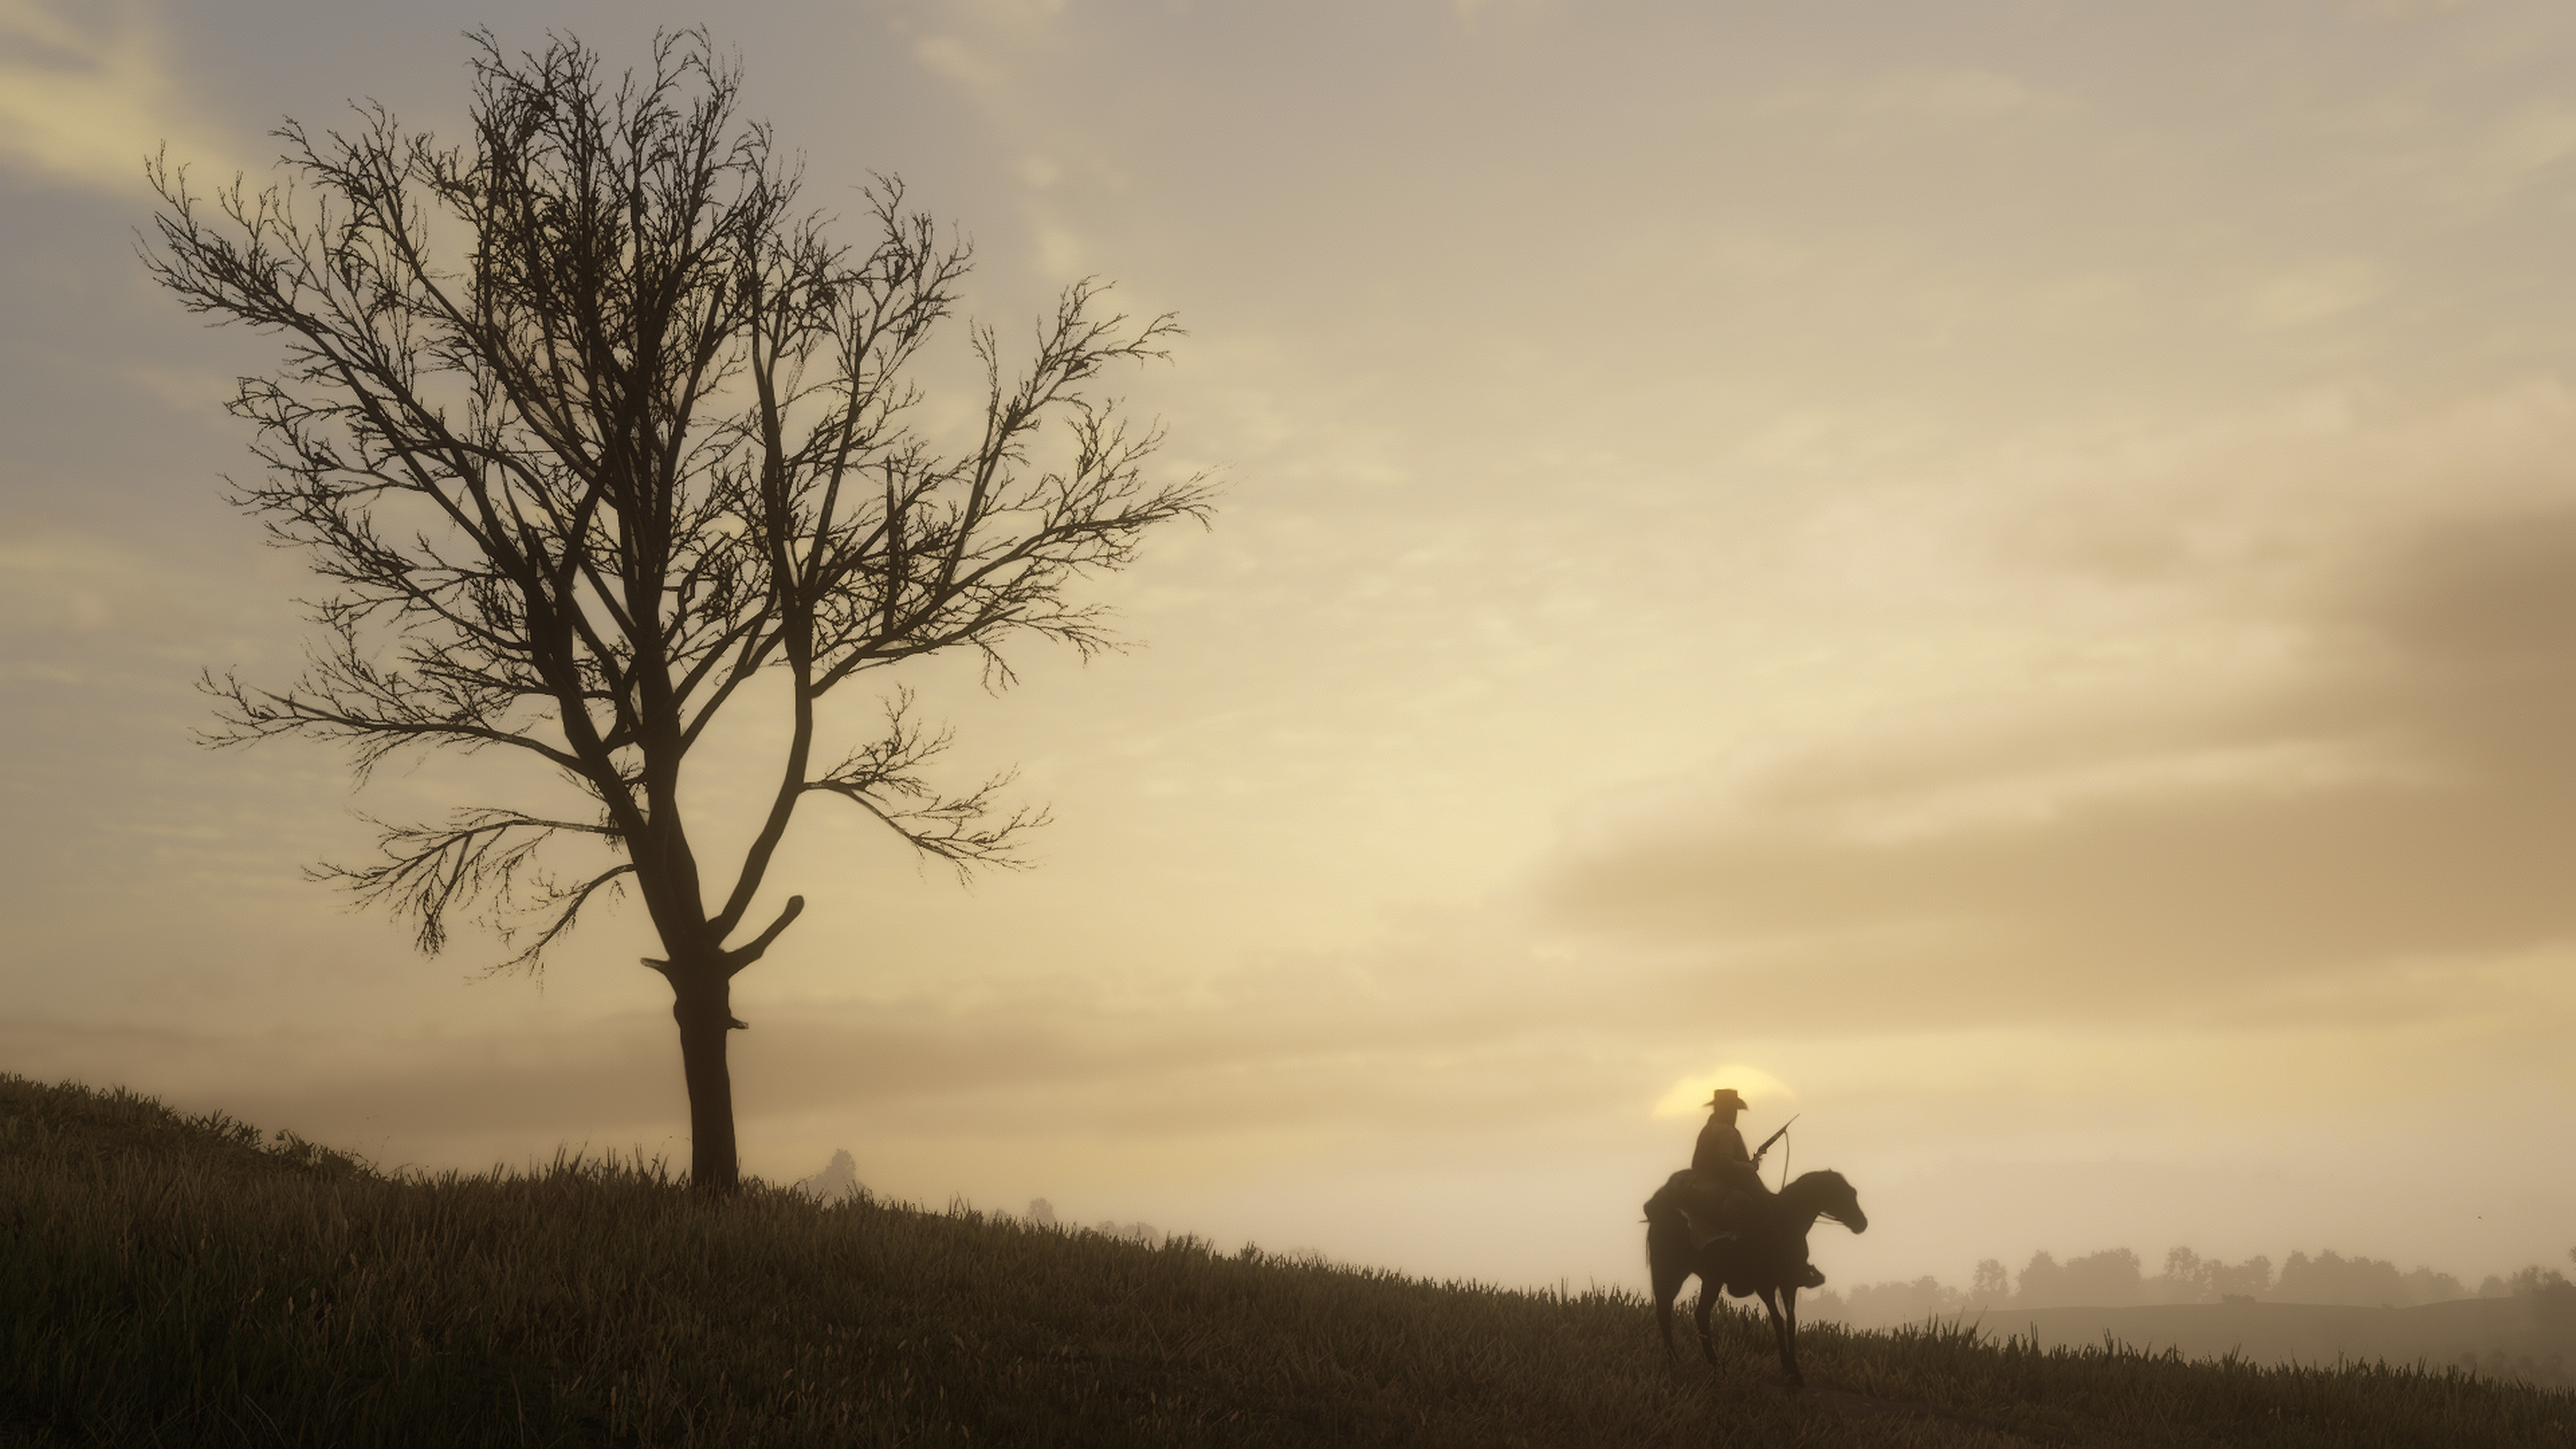 General 3840x2160 Red Dead Redemption Red Dead Redemption 2 video game art video games cowboys horse